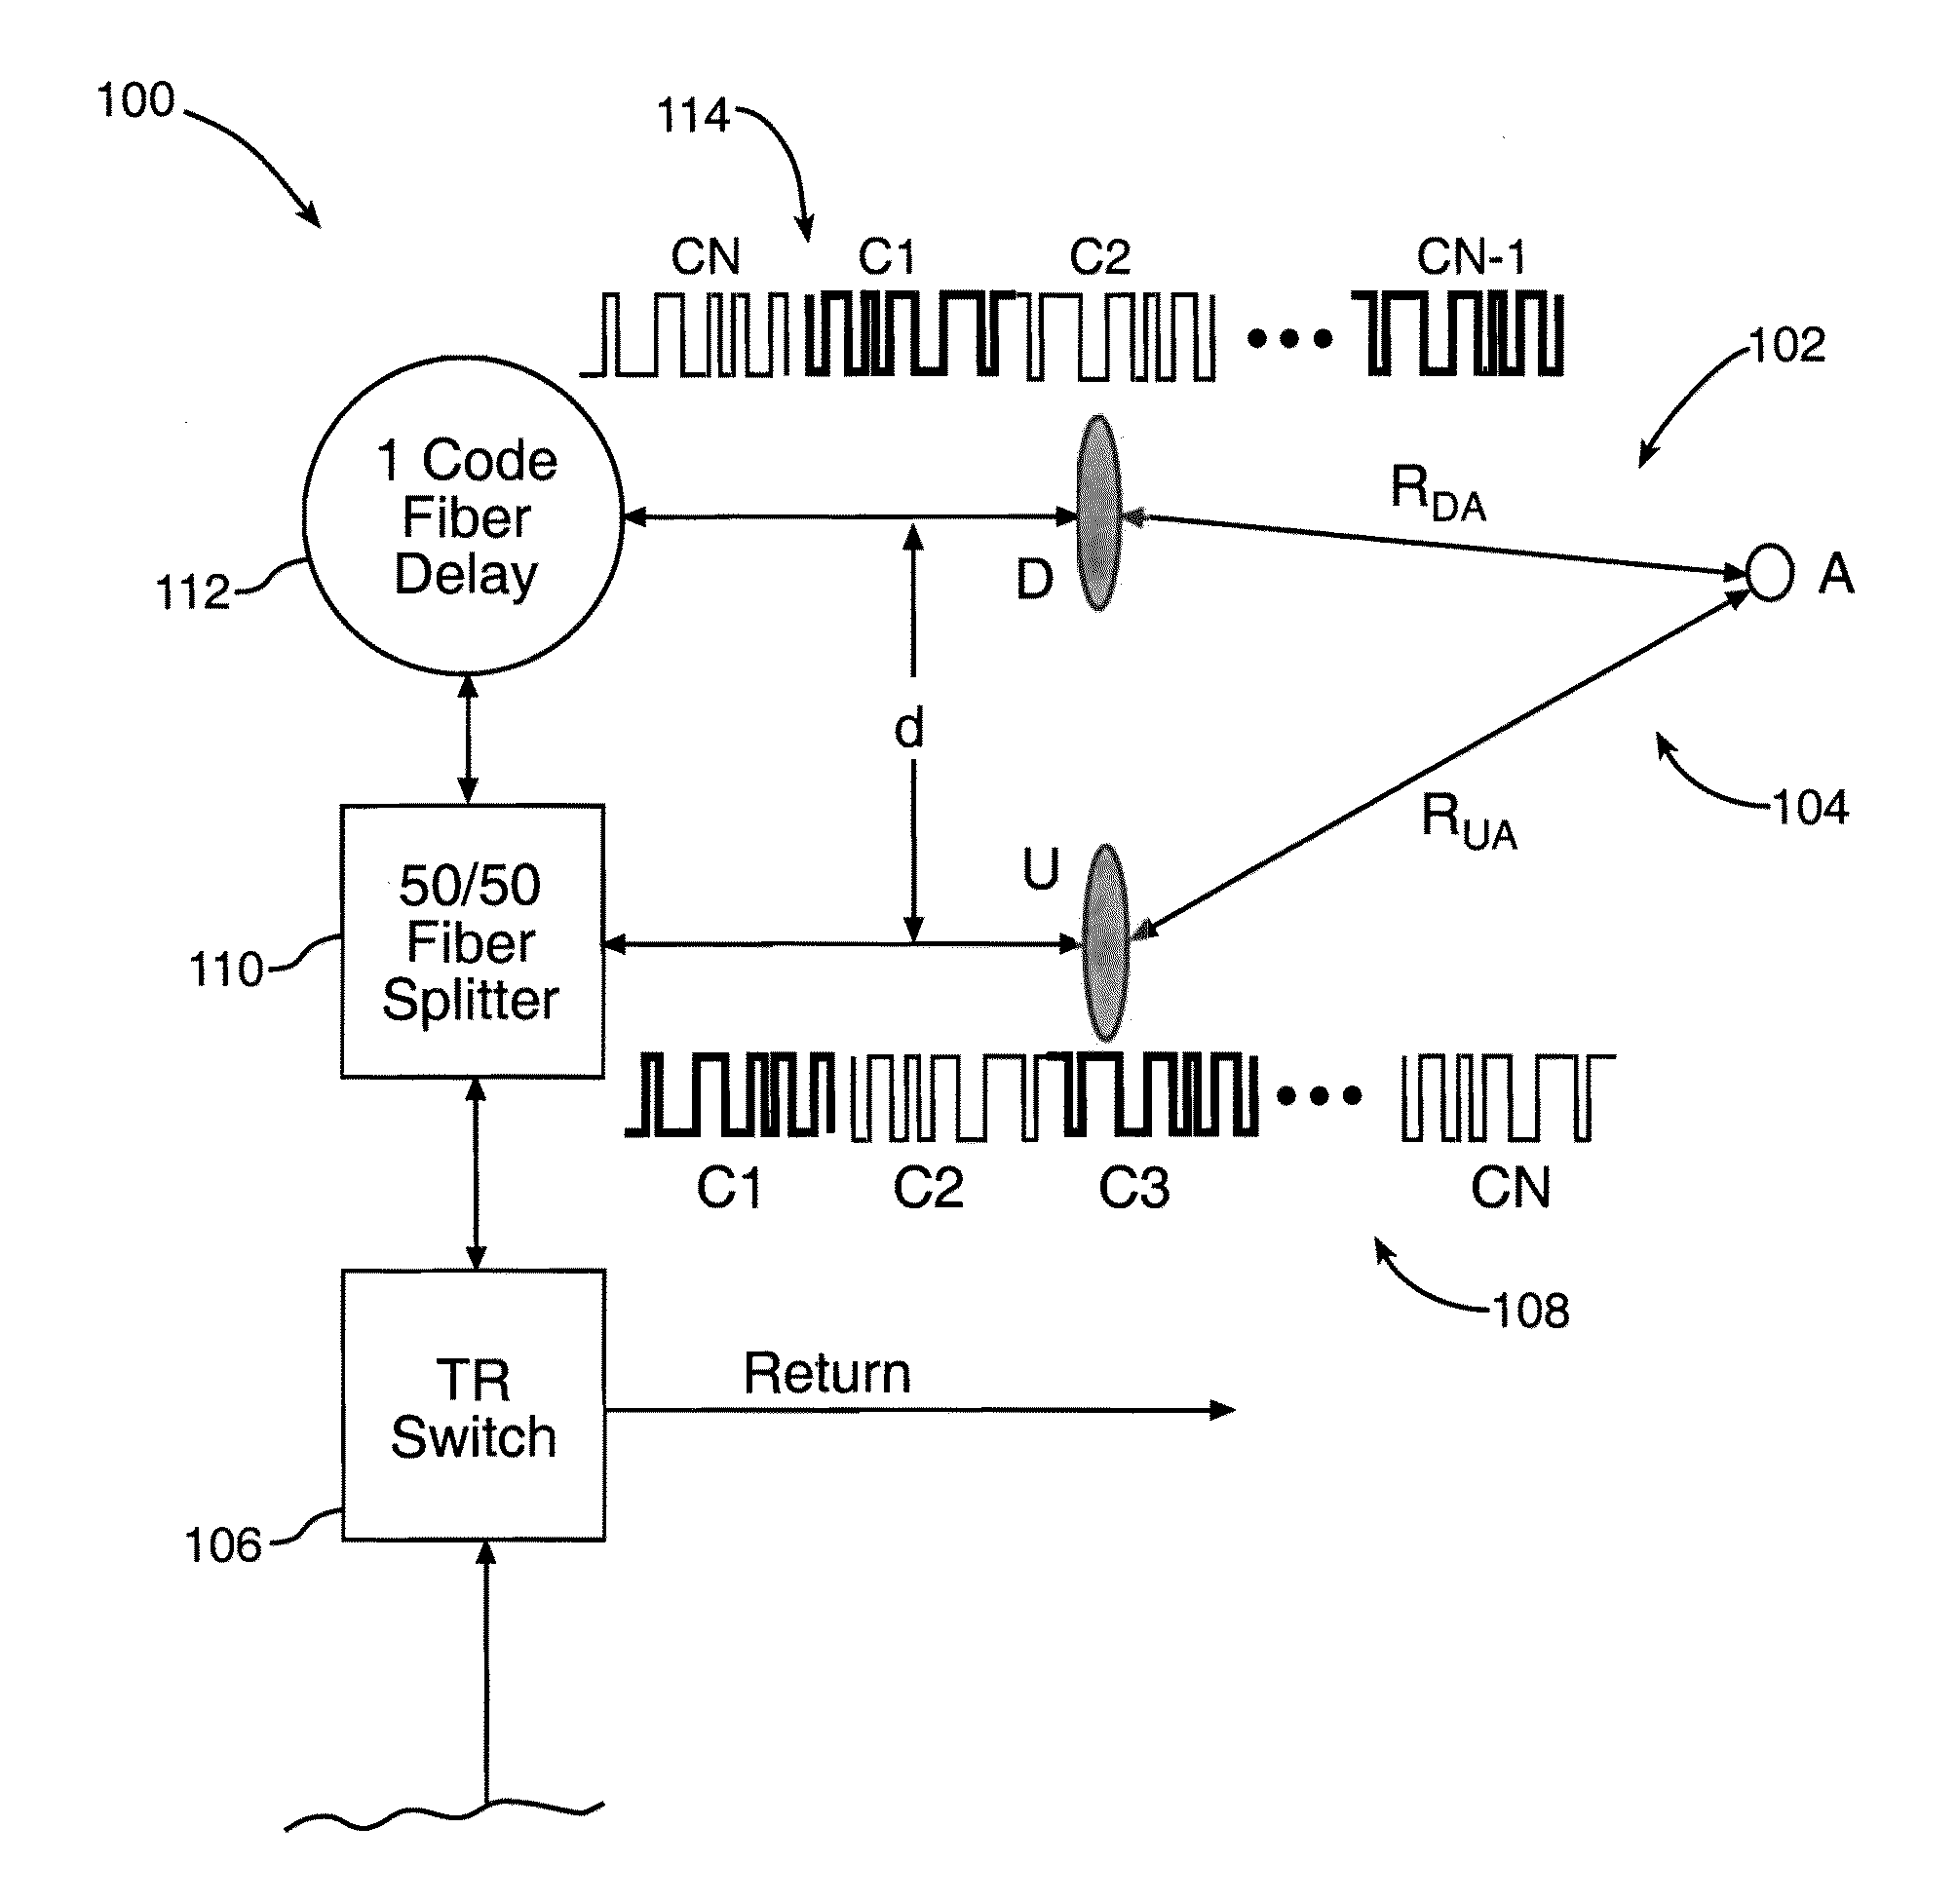 Apparatus and method for a multiple aperture coherent ladar